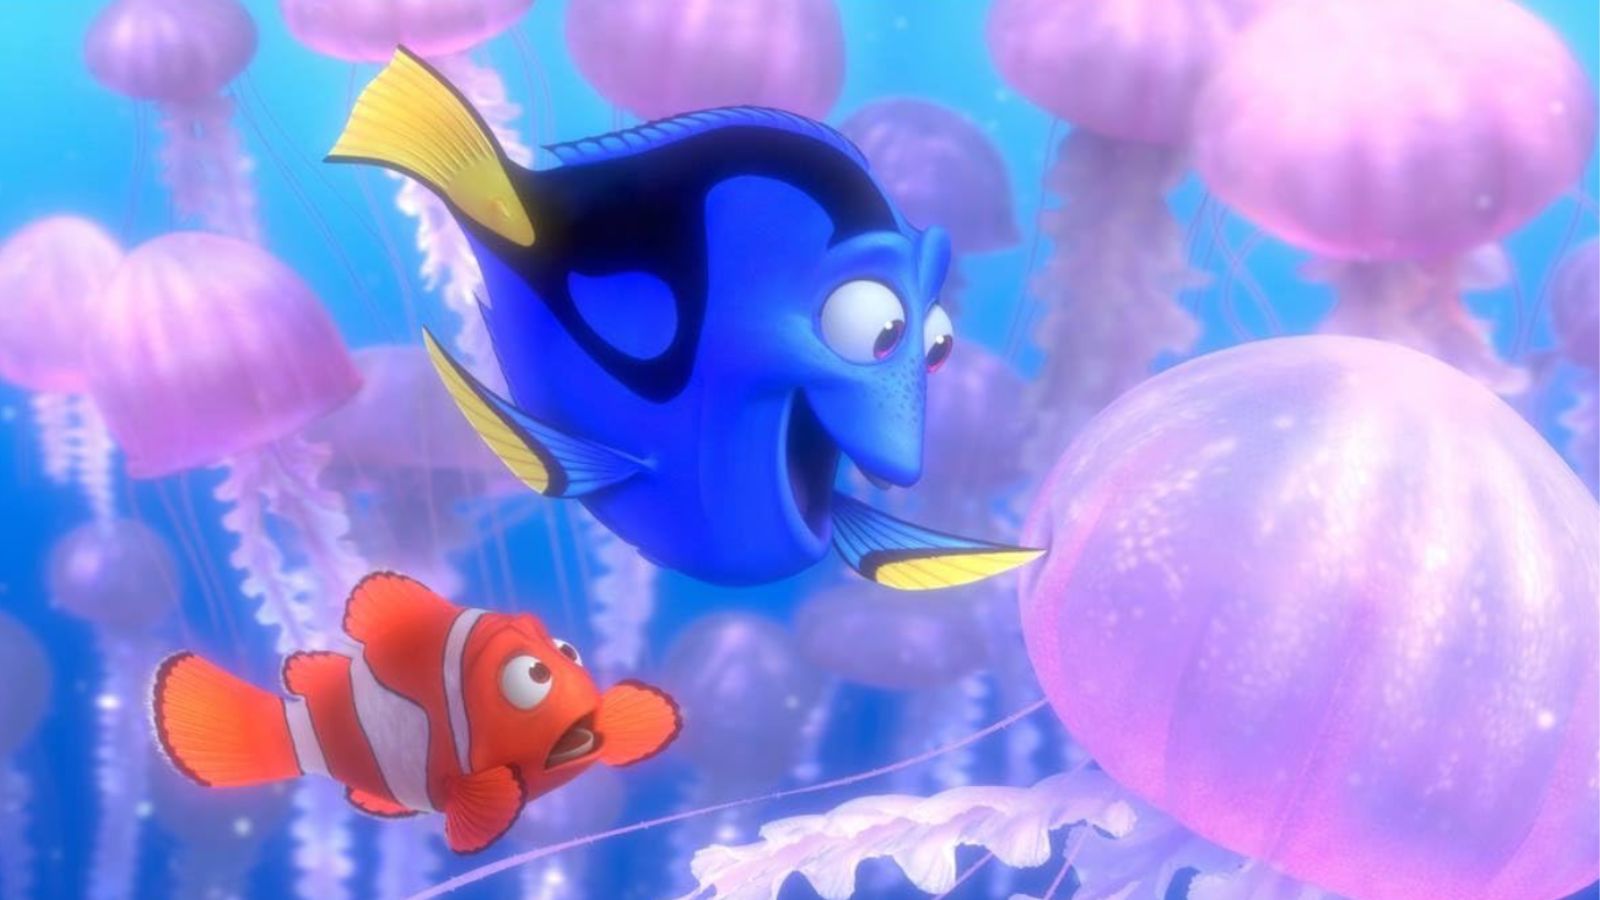 <p class="p2">“Finding Nemo” is an animated movie that tells the story of a clownfish named Marlin who sets out to find his son, Nemo, who has been captured by a diver. The movie is known for its heartwarming story and memorable characters.</p> <p class="p2">One of the most famous quotes from the movie is “Just keep swimming,” which is spoken by Dory, a forgetful fish who helps Marlin on his journey. The quote has become a motivational phrase that encourages people to keep going even when things get tough. Another iconic quote from the movie is “Fish are friends, not food,” which is spoken by Bruce, a great white shark who is trying to overcome his instinct to eat fish. The quote represents the idea of friendship and the importance of treating others with kindness.</p>